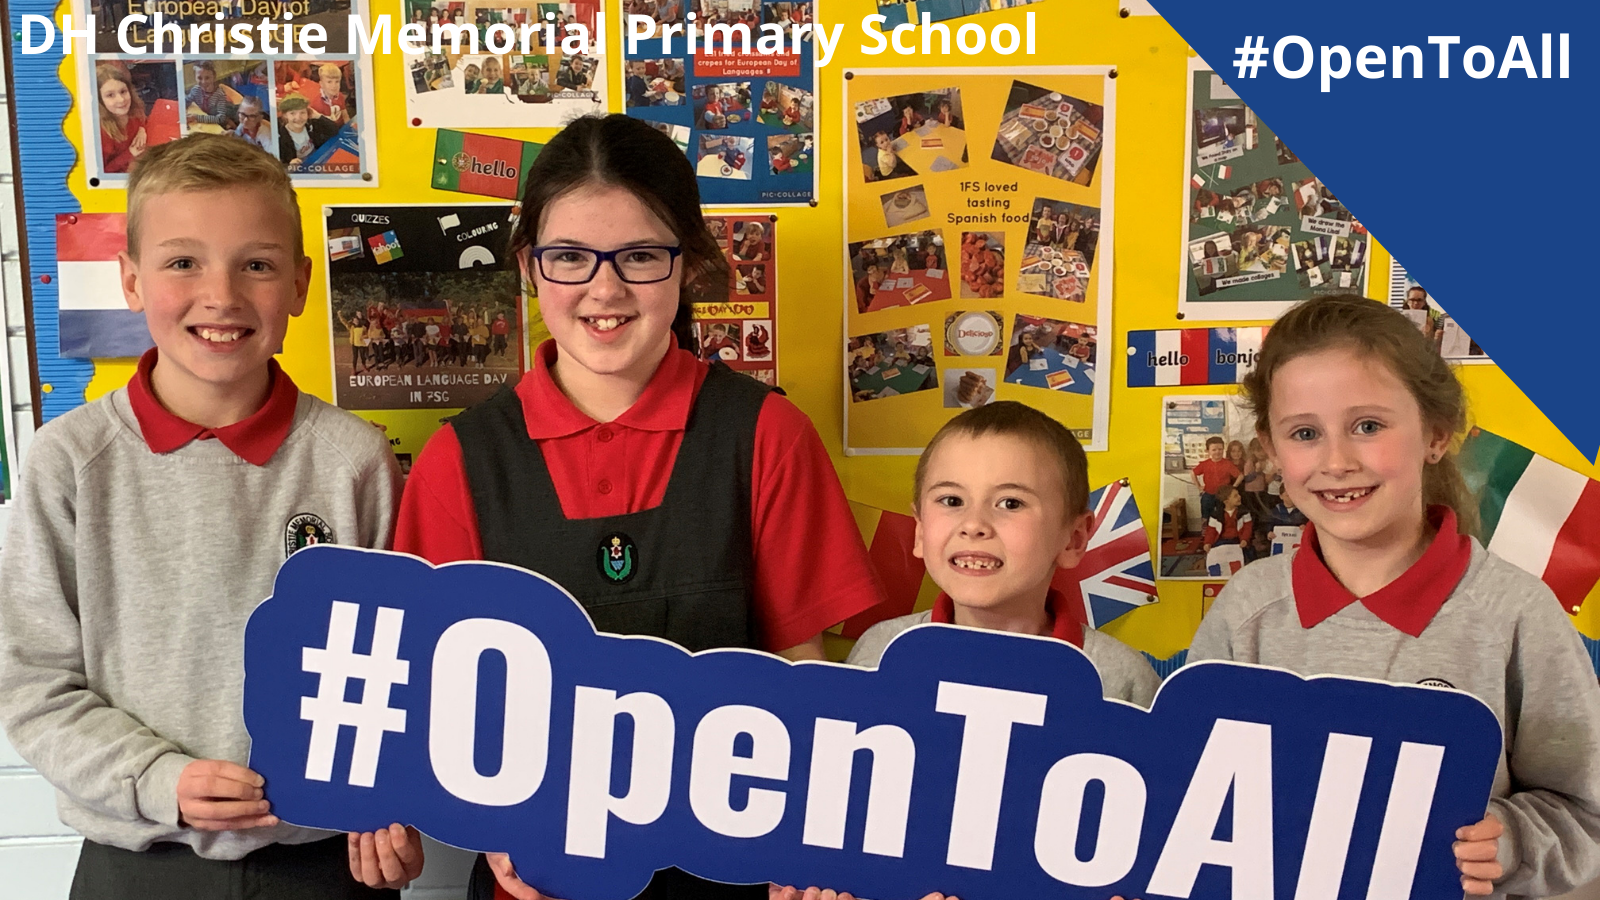 OpenToAll collage DH Christie Memorial PS